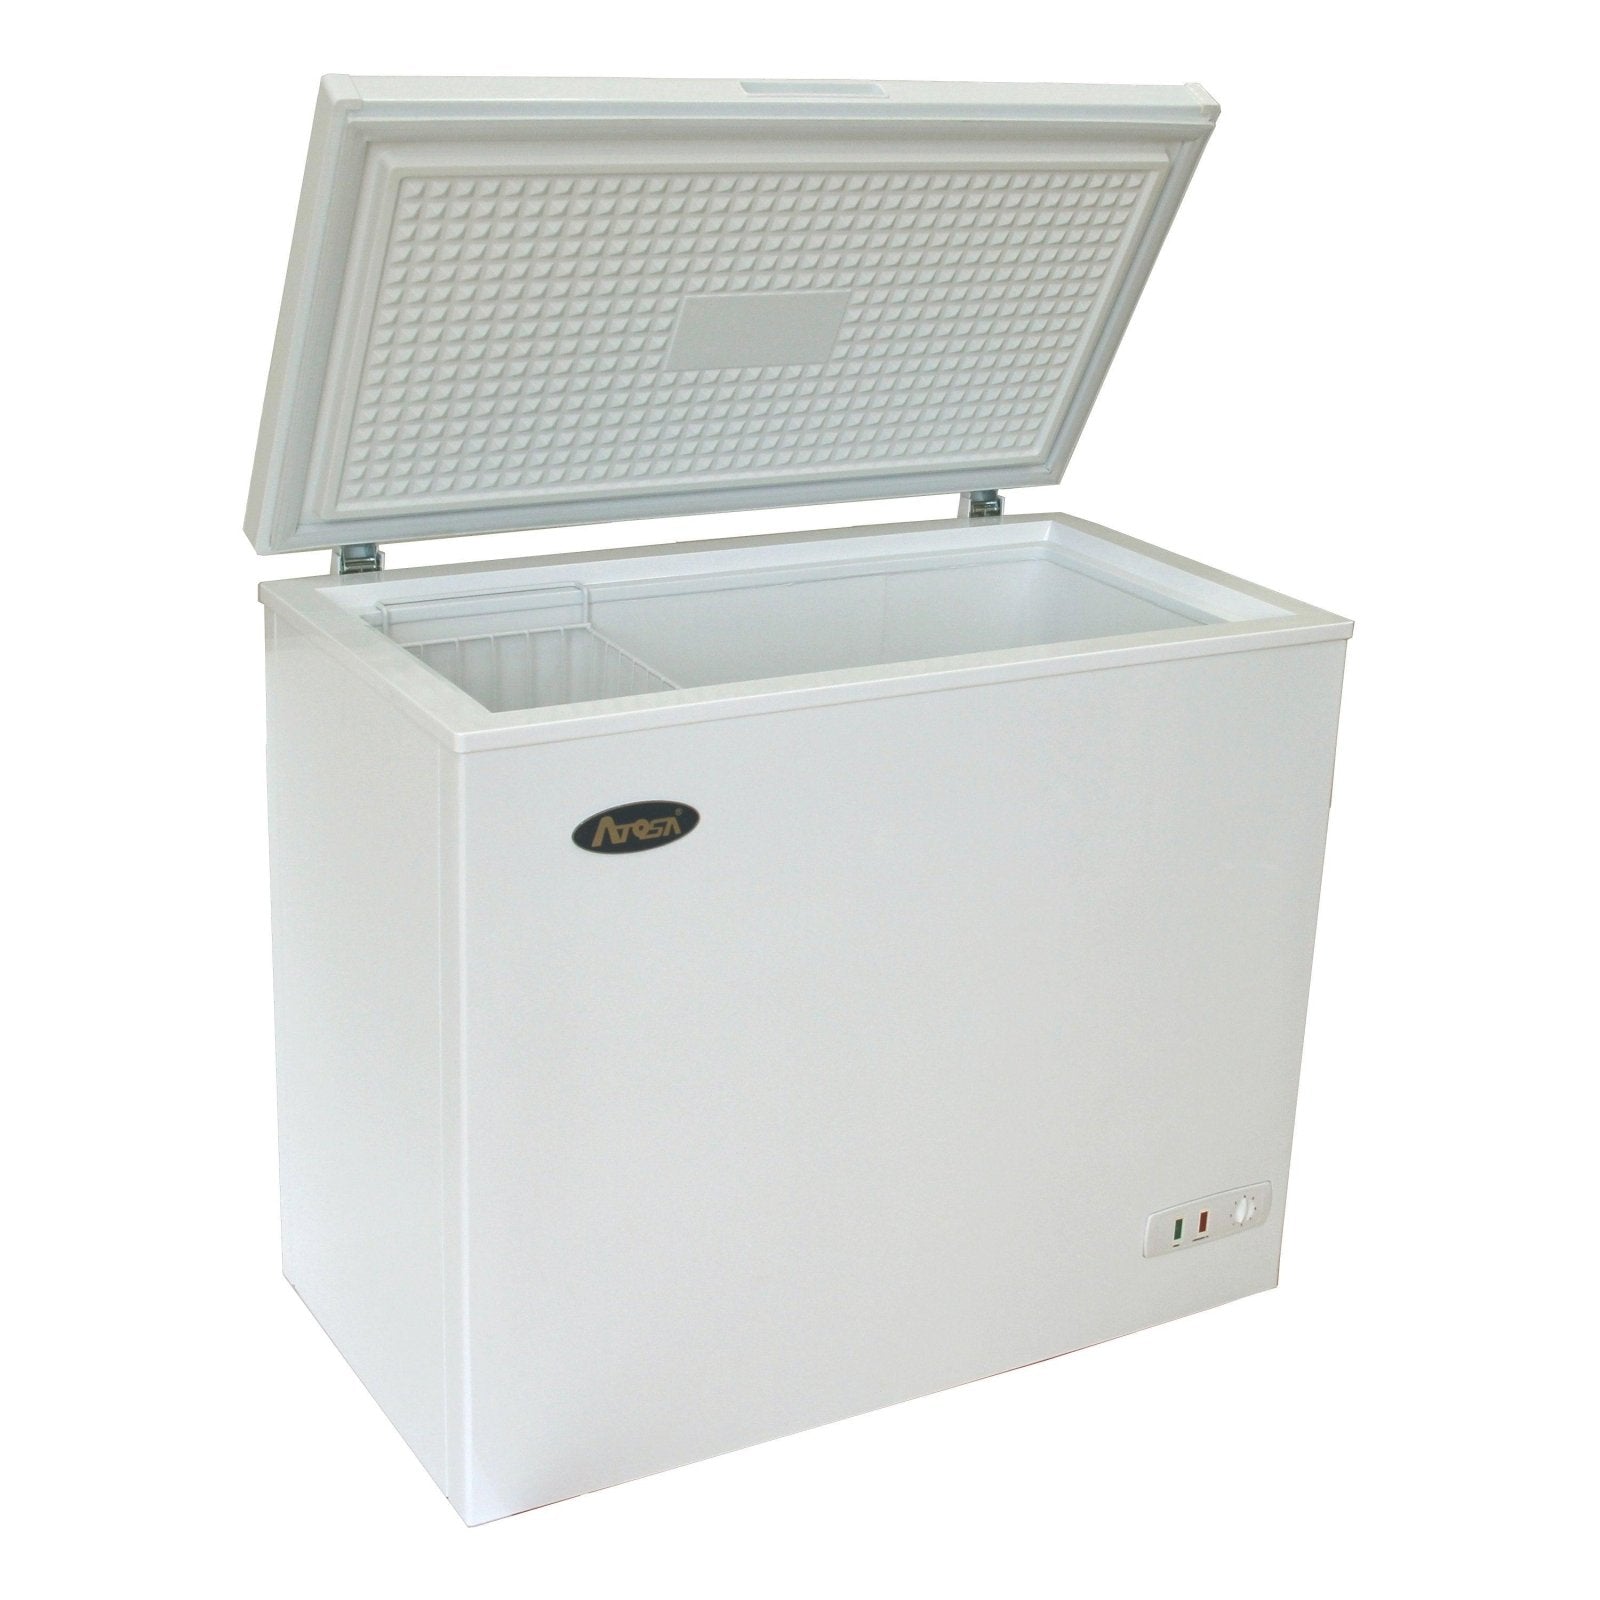 Atosa MWF9007 7 Cu. Ft. Solid Top Chest Freezer